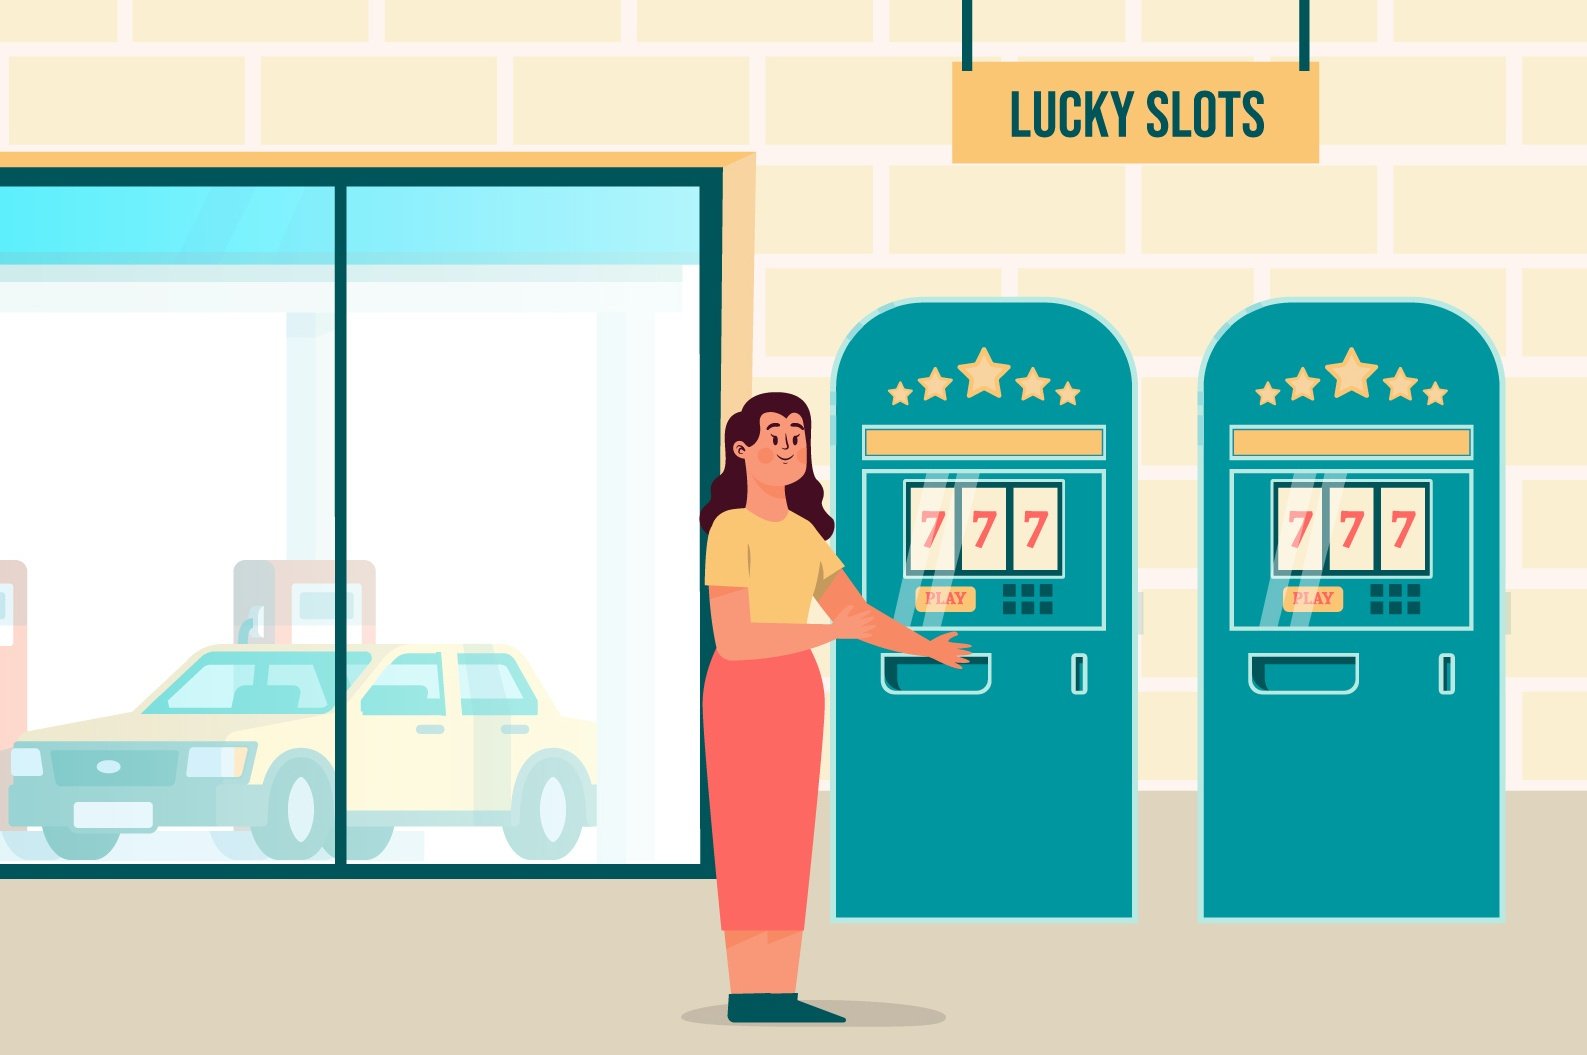 What’s The Deal With Slot Machines And Gas Stations?